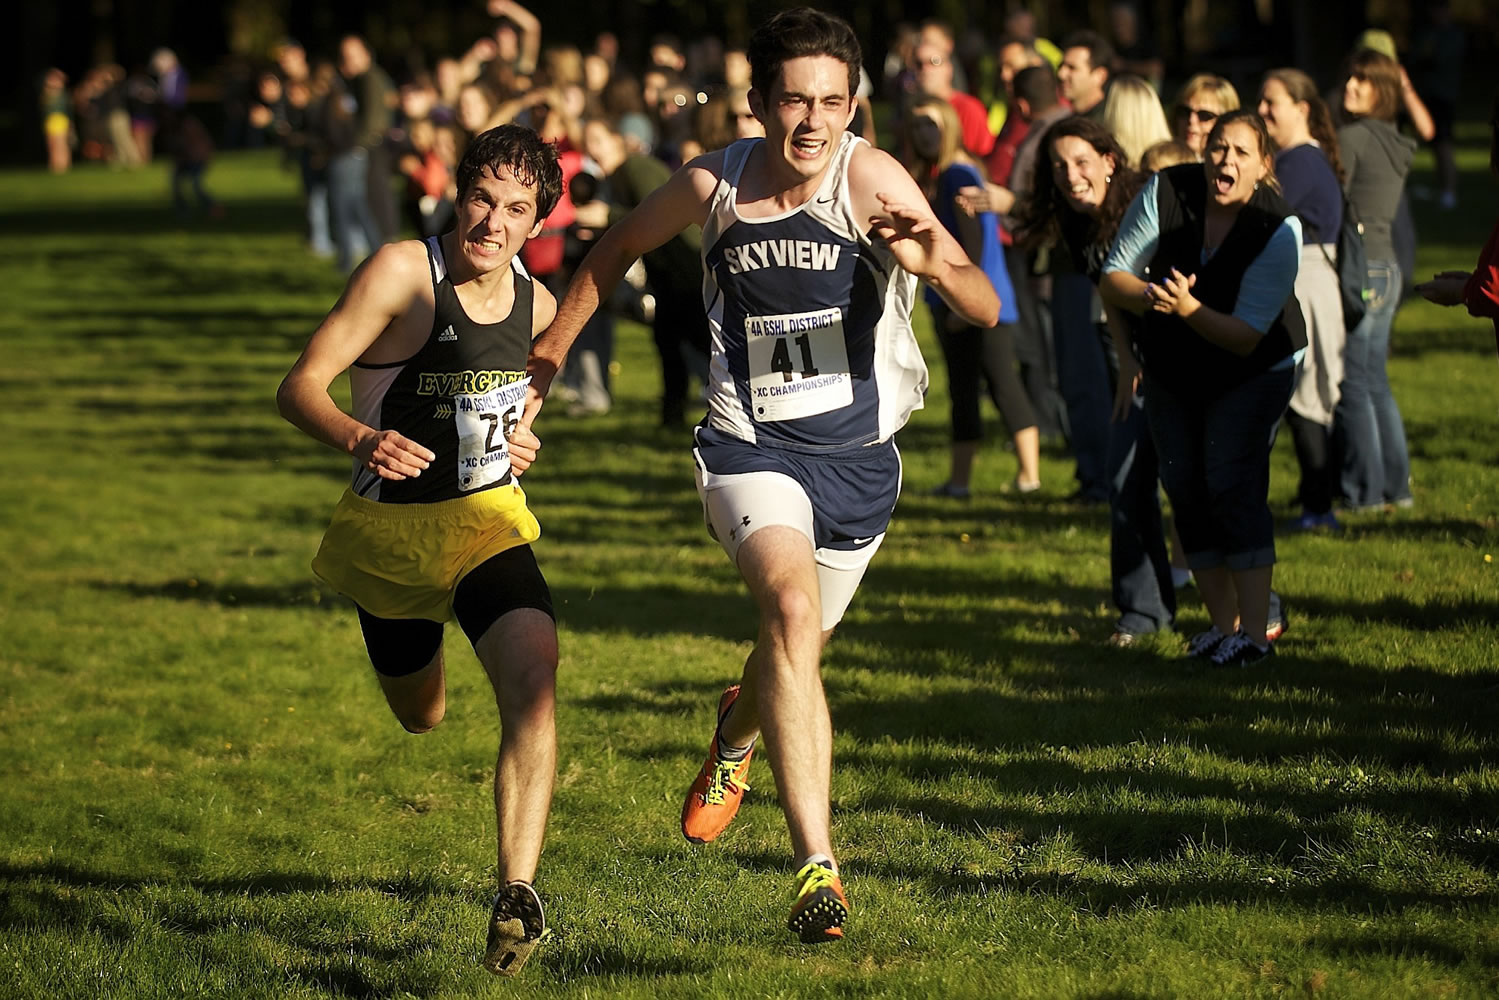 Dan Poyfair, right, of Skyview High School holds off Taryn Sciortino, left, of Evergreen High School at the finish line in the boys 4A district cross country meet Wednesday October 23, 2013 at Lewisville Park in Battle Ground, Washington. The Skyview boys cross country team won the district meet.